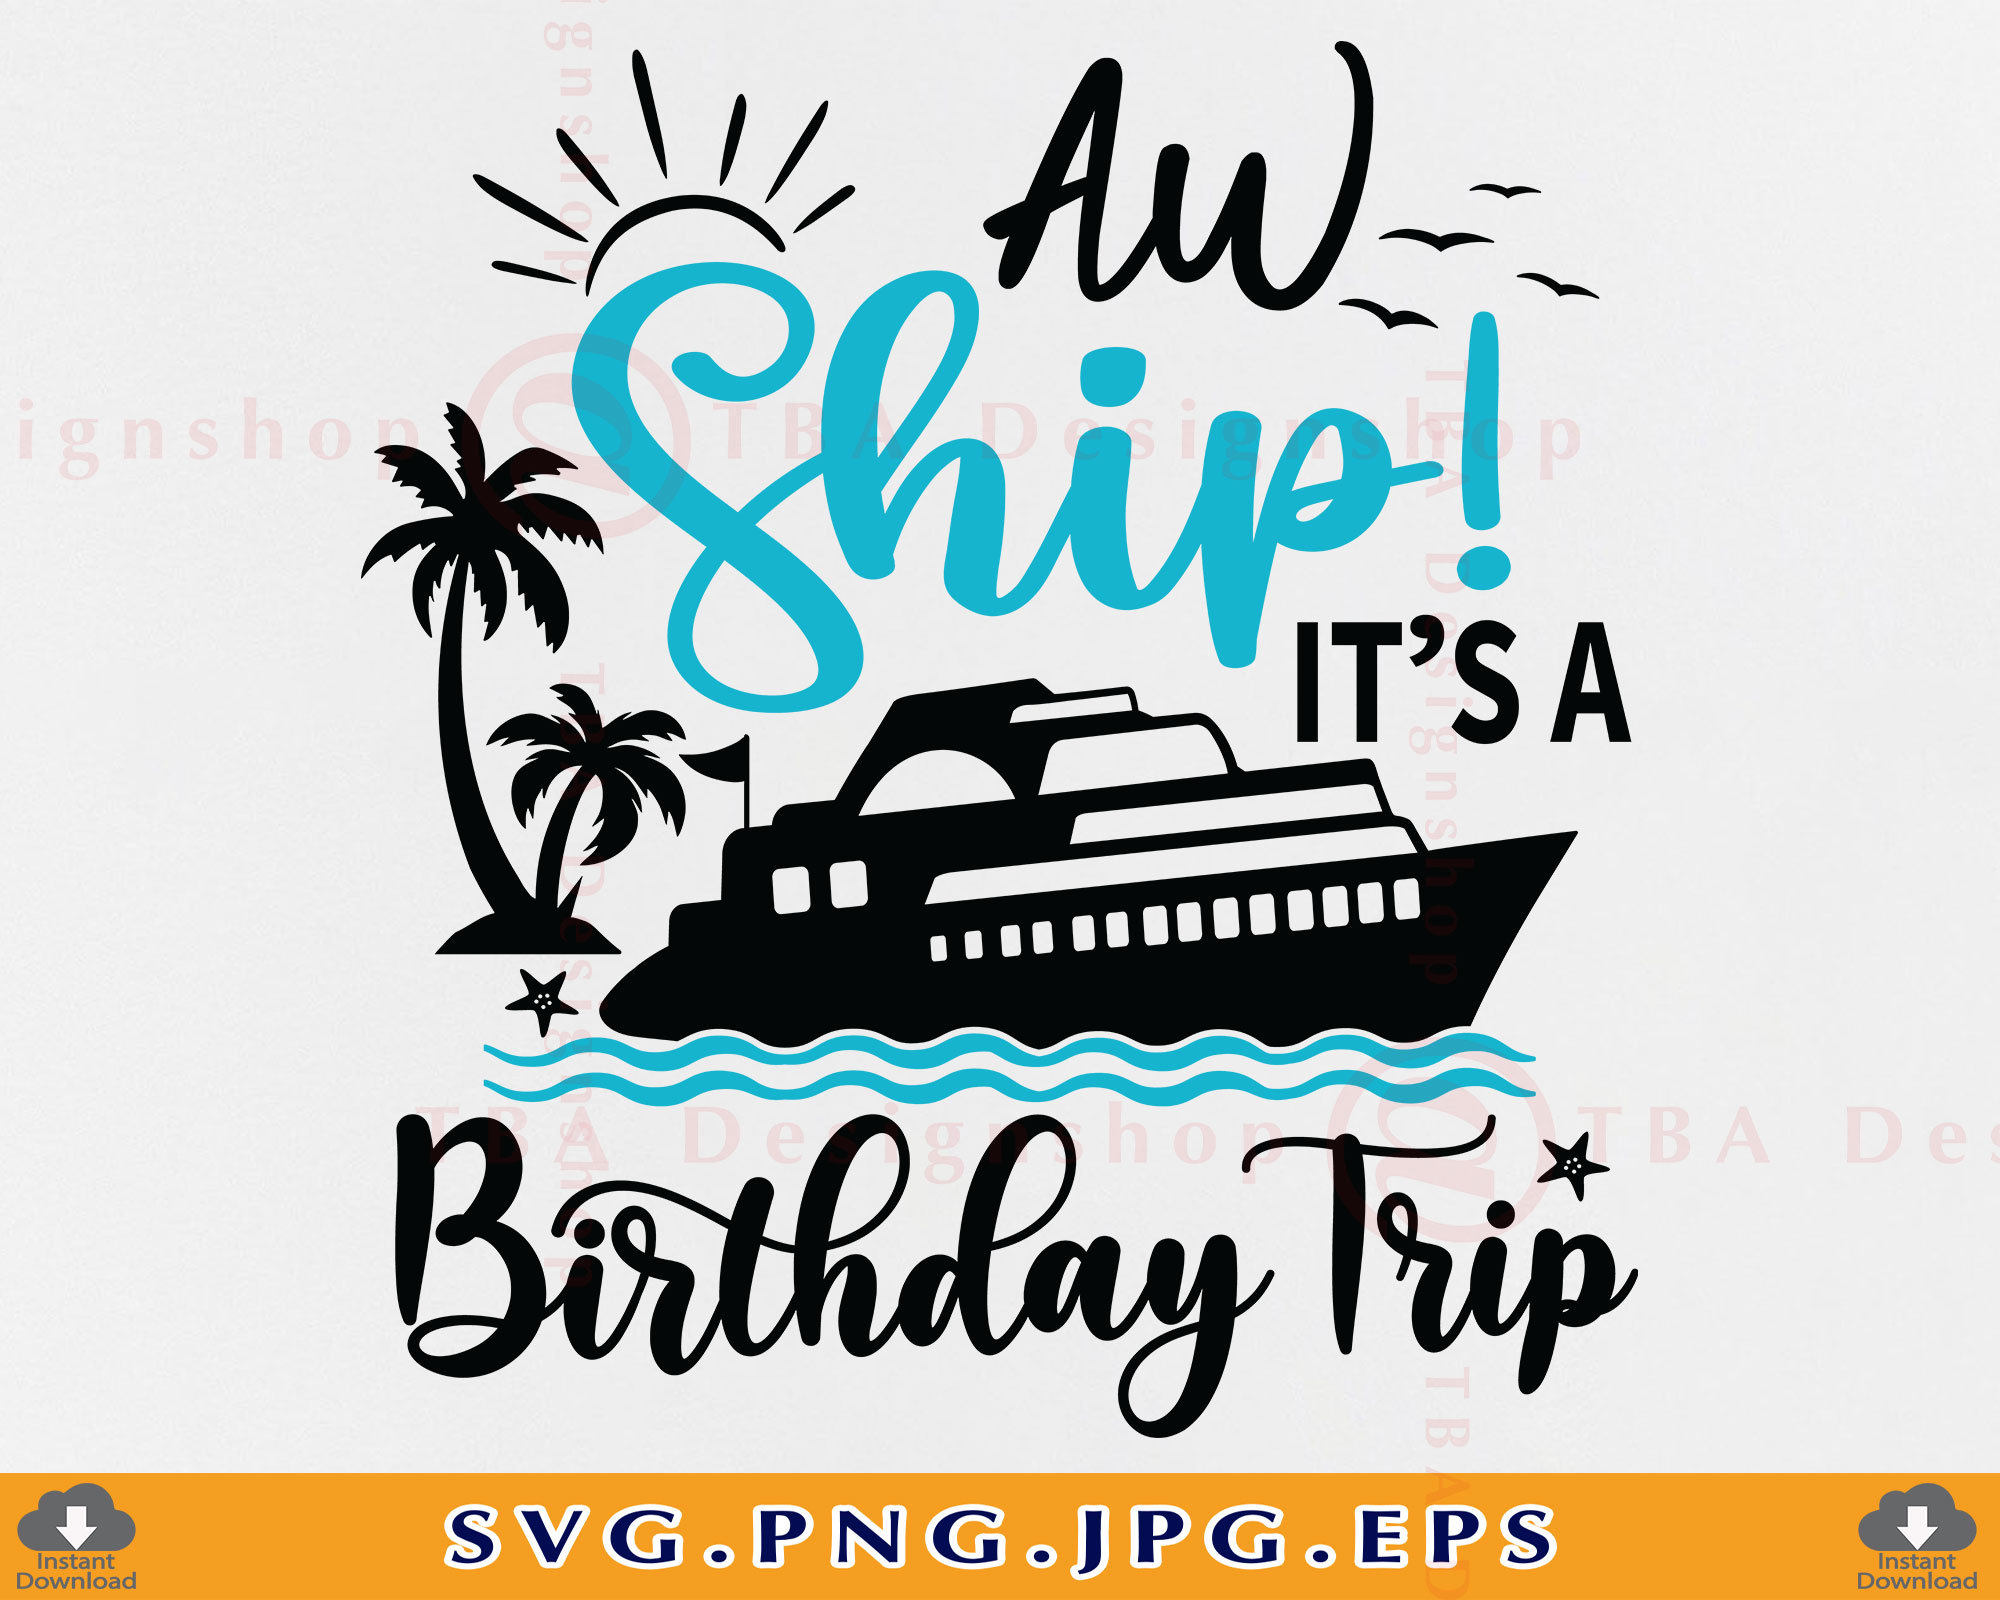 Aw Ship It's A Birthday Trip SVG Cruise SVG Cut File - Etsy